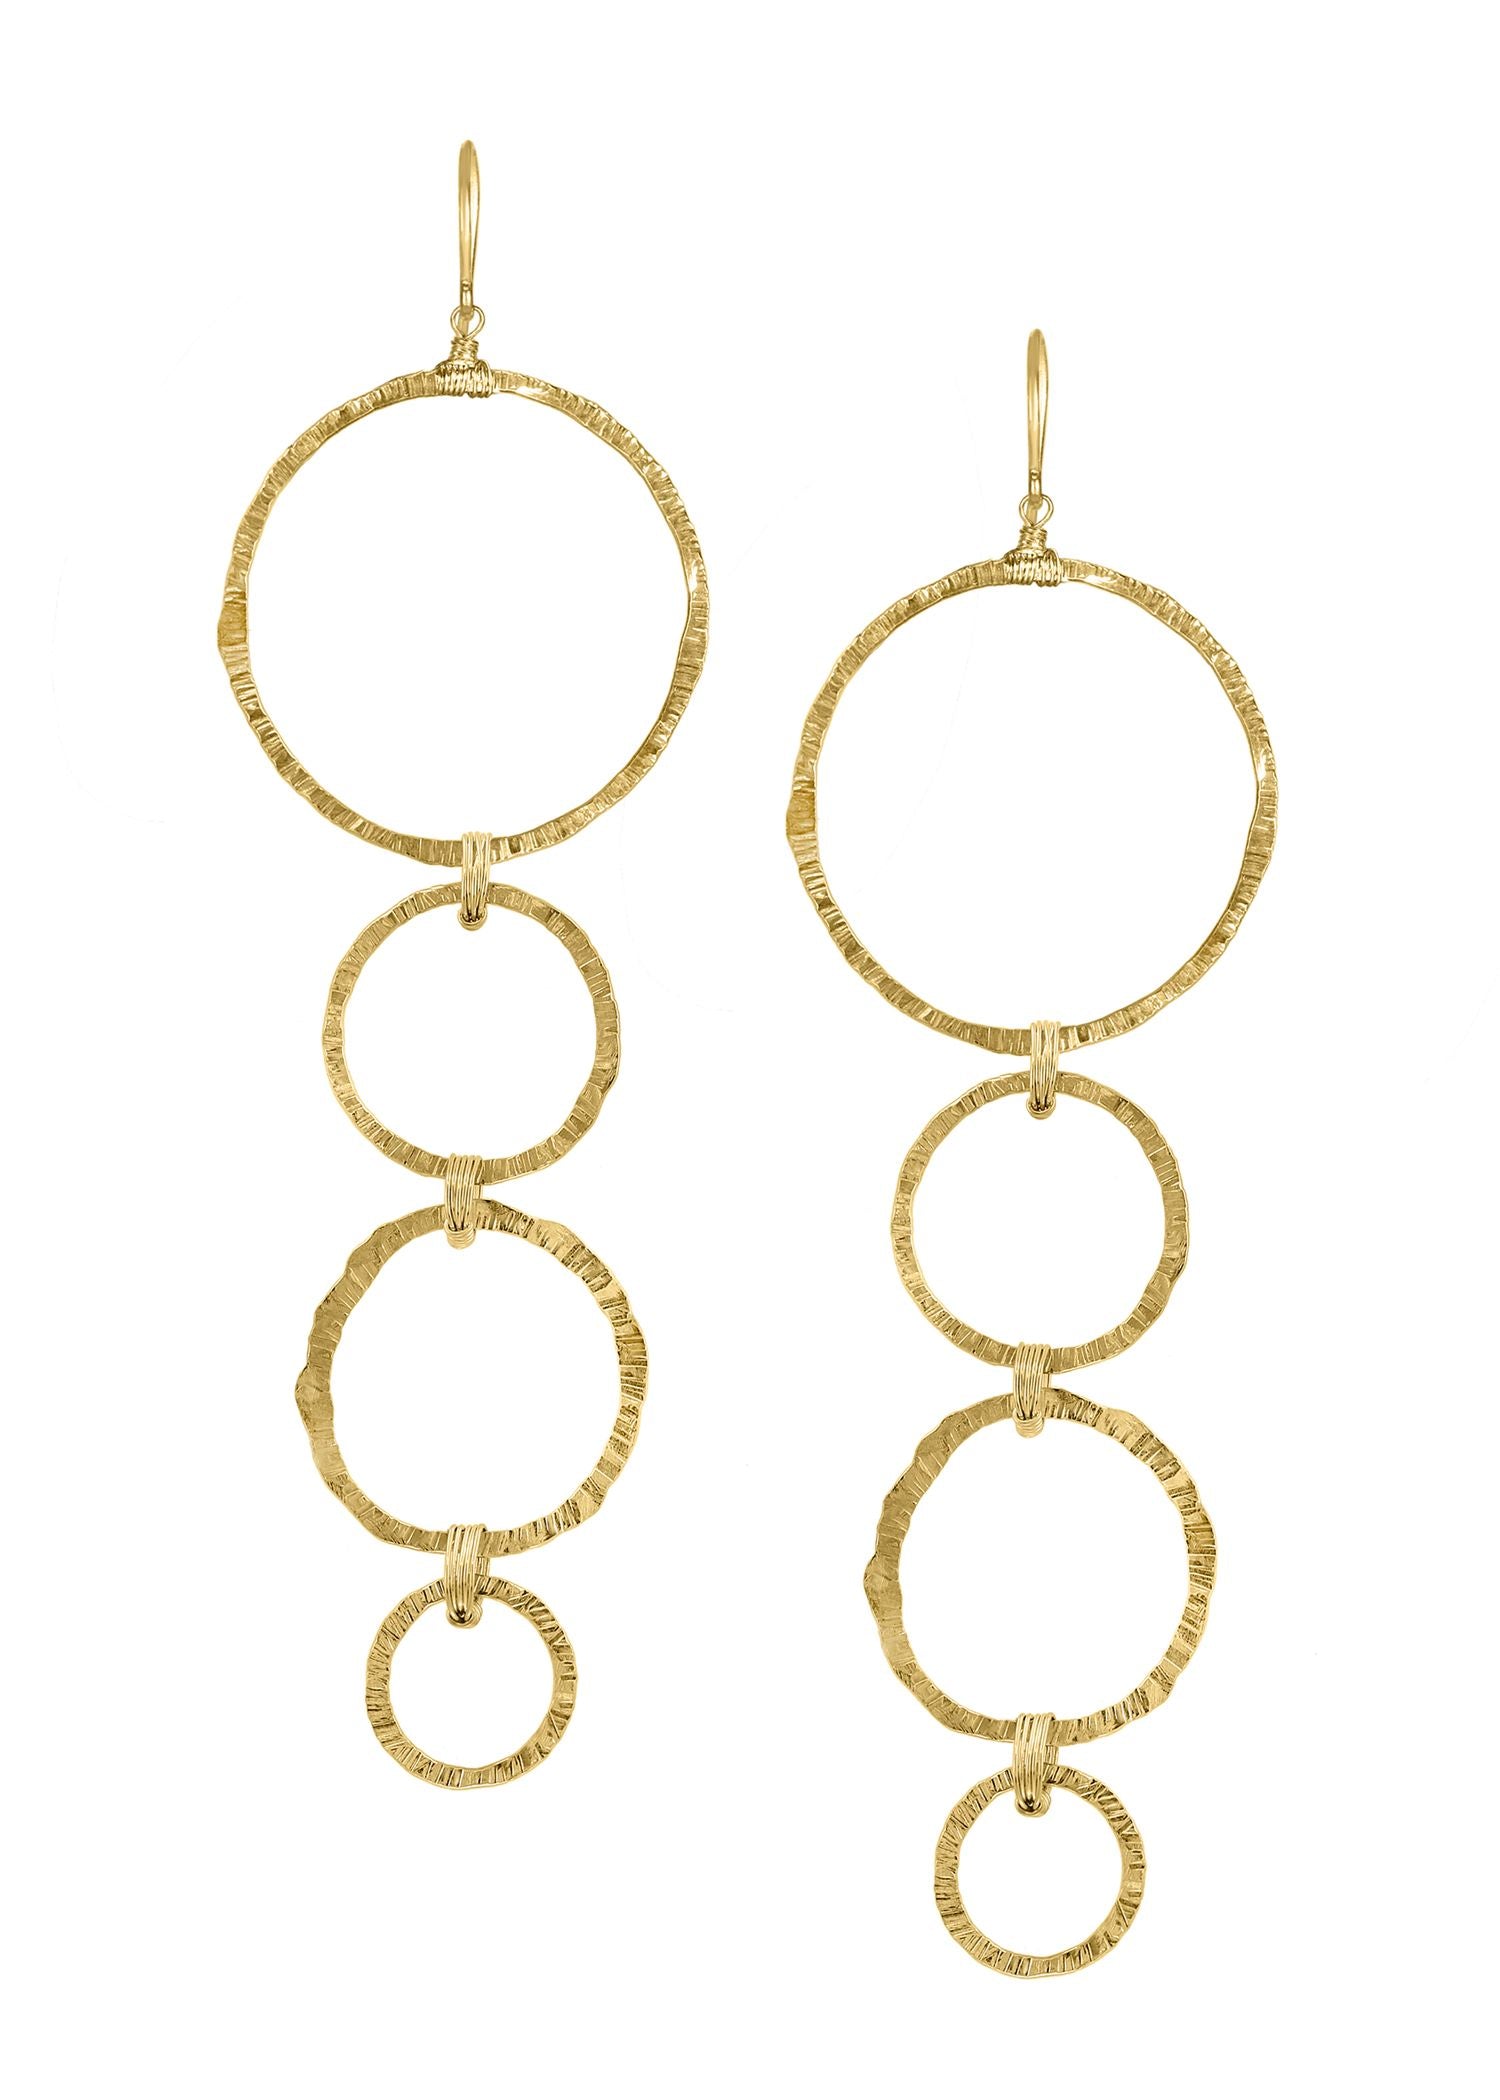 14k gold fill Earrings measure 3-1/2" in length (including the ear wires) and 1-1/16" in width Handmade in our Los Angeles studio